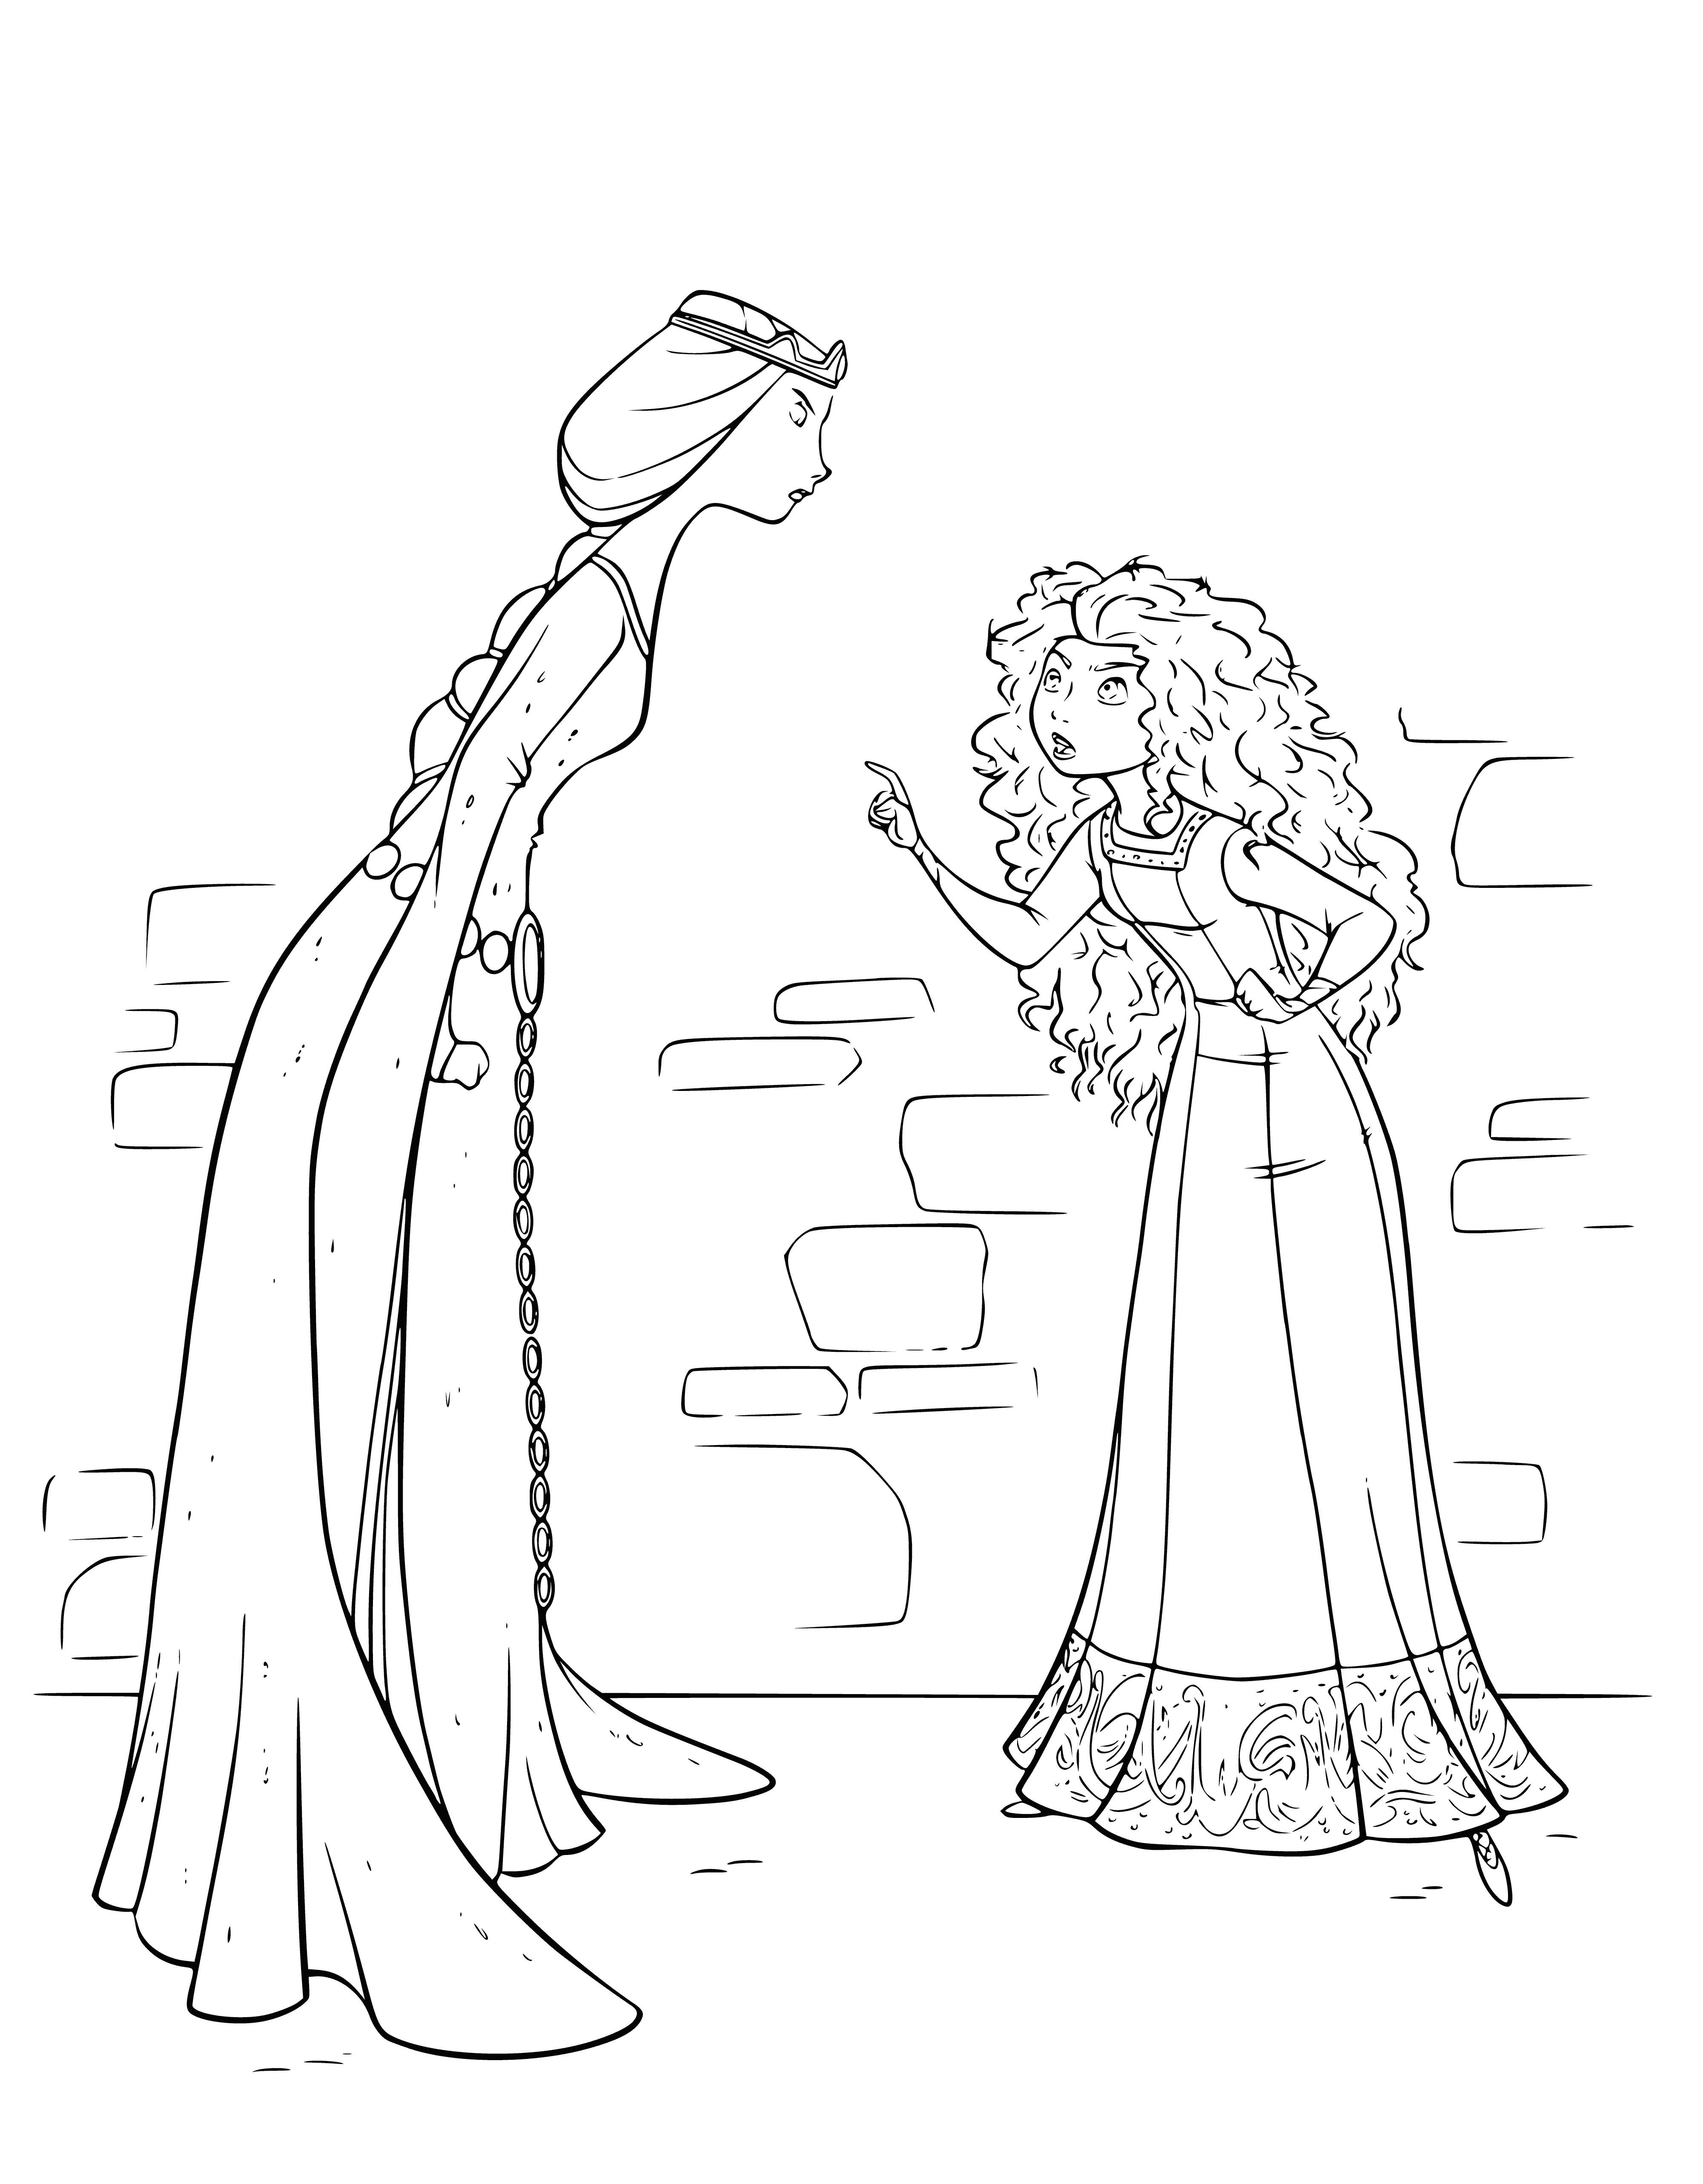 coloring page: Princess Merida and Queen Elinor argue, with Merida gesturing angrily and Elinor worried and dismayed.